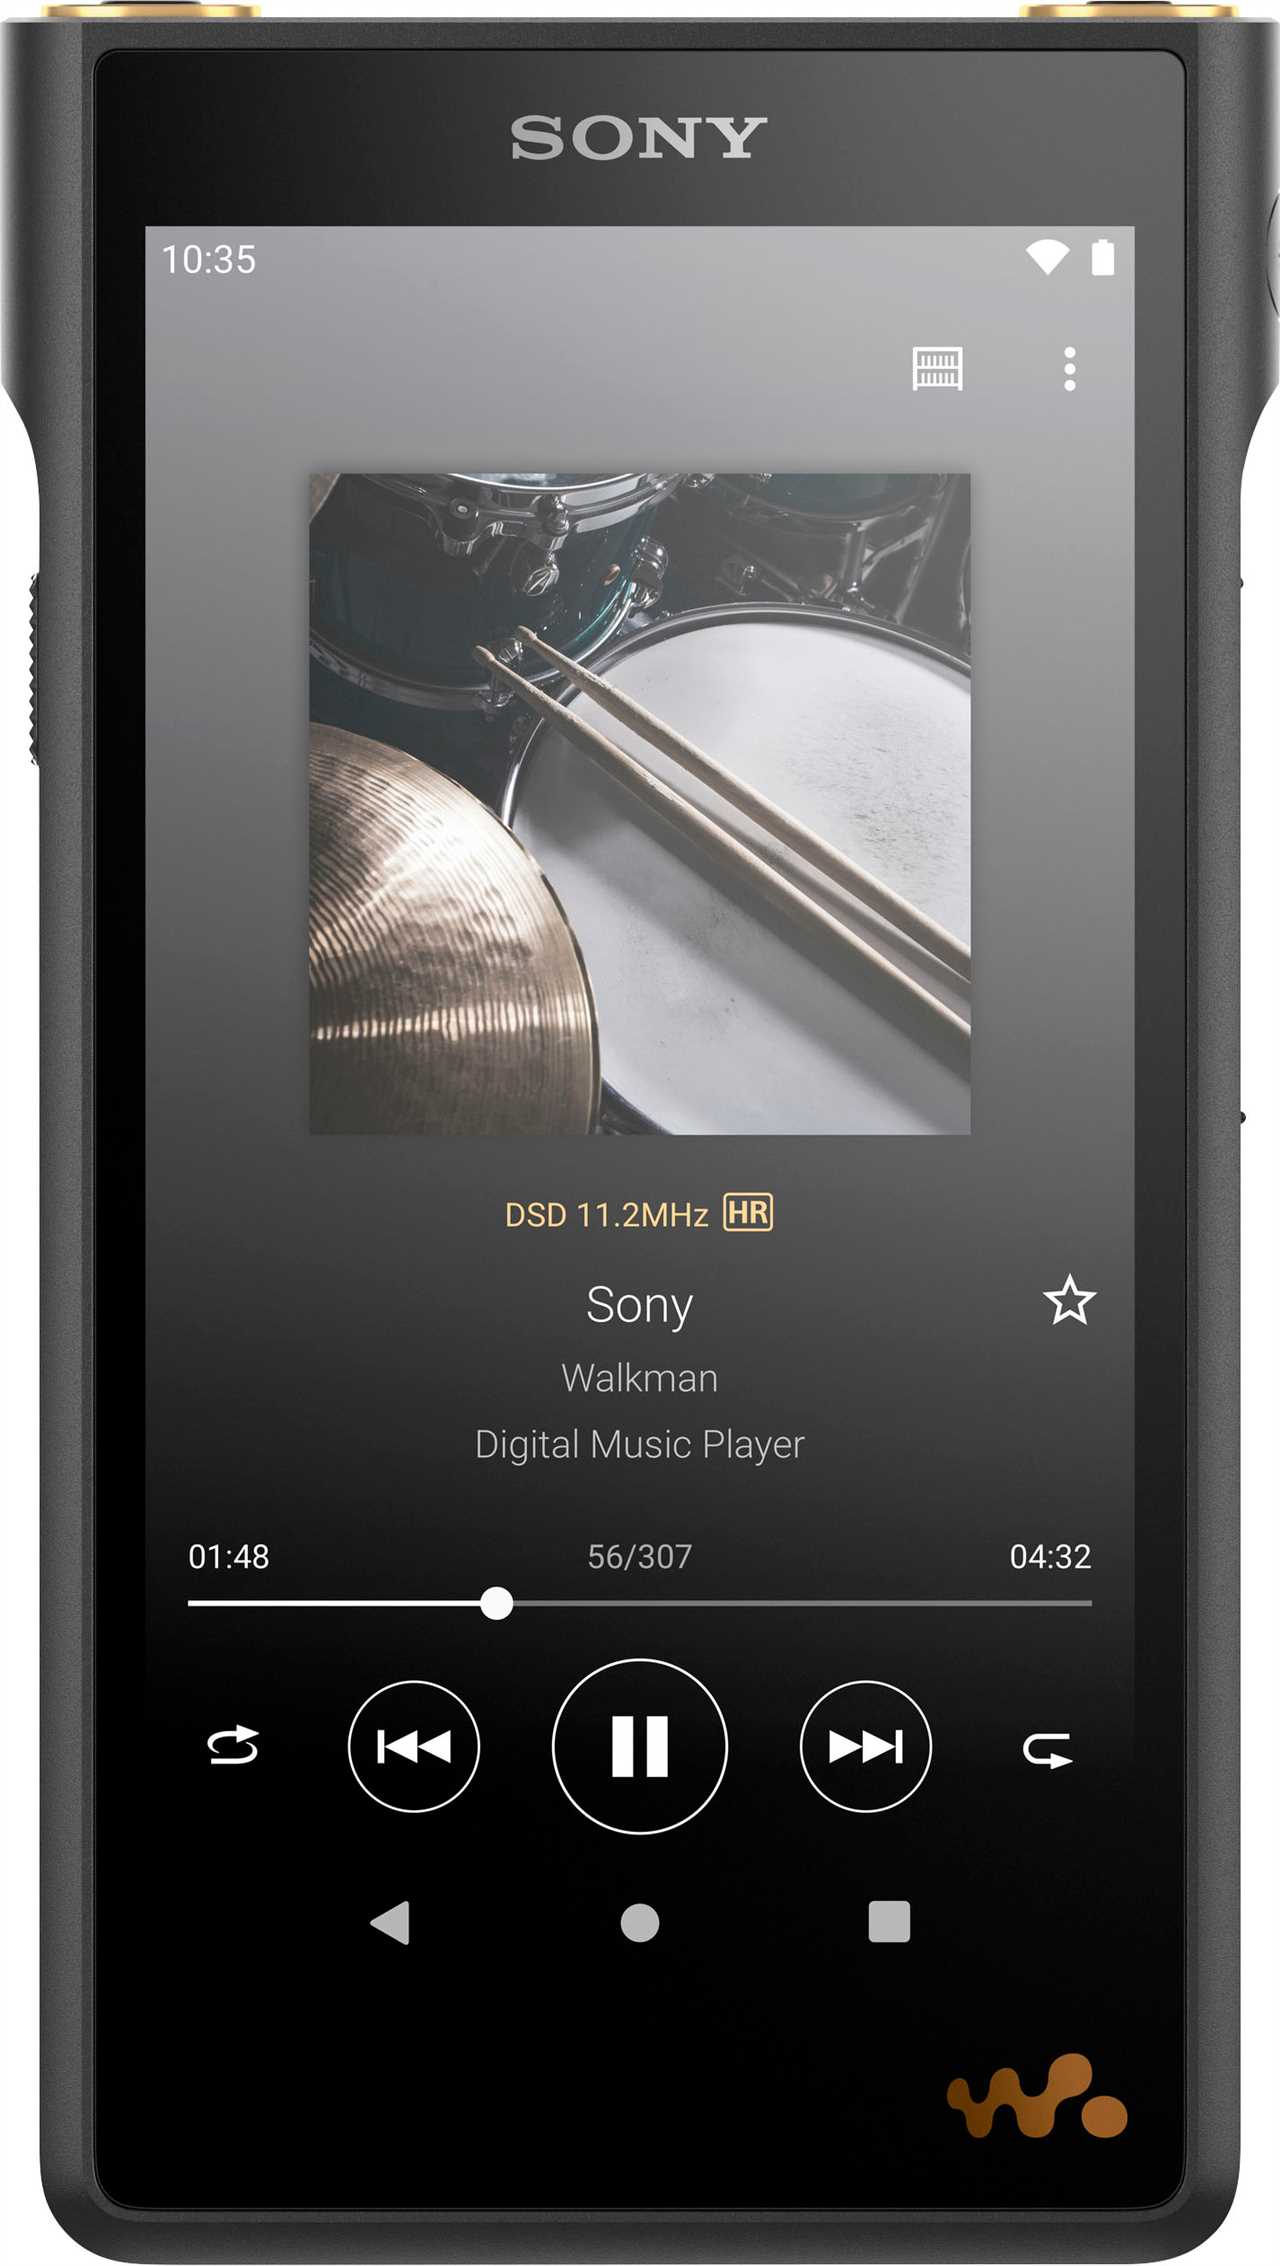 How to Use Sony MP3 Player